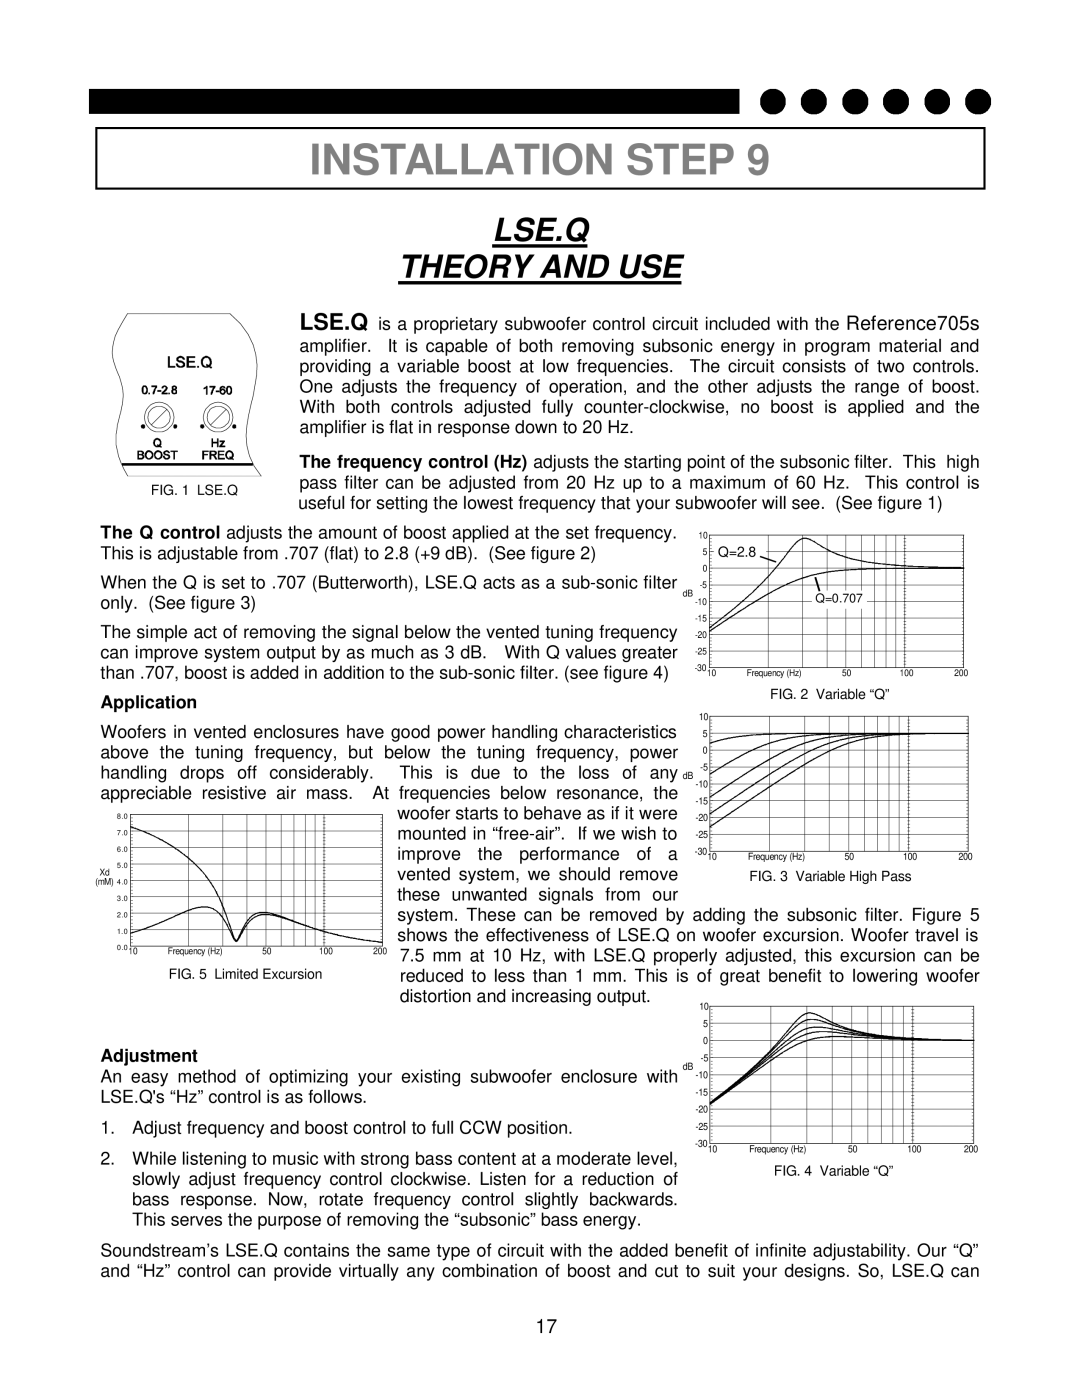 Soundstream Technologies 705s owner manual Lse.Q Theory And Use, Installation Step, Application, Adjustment 